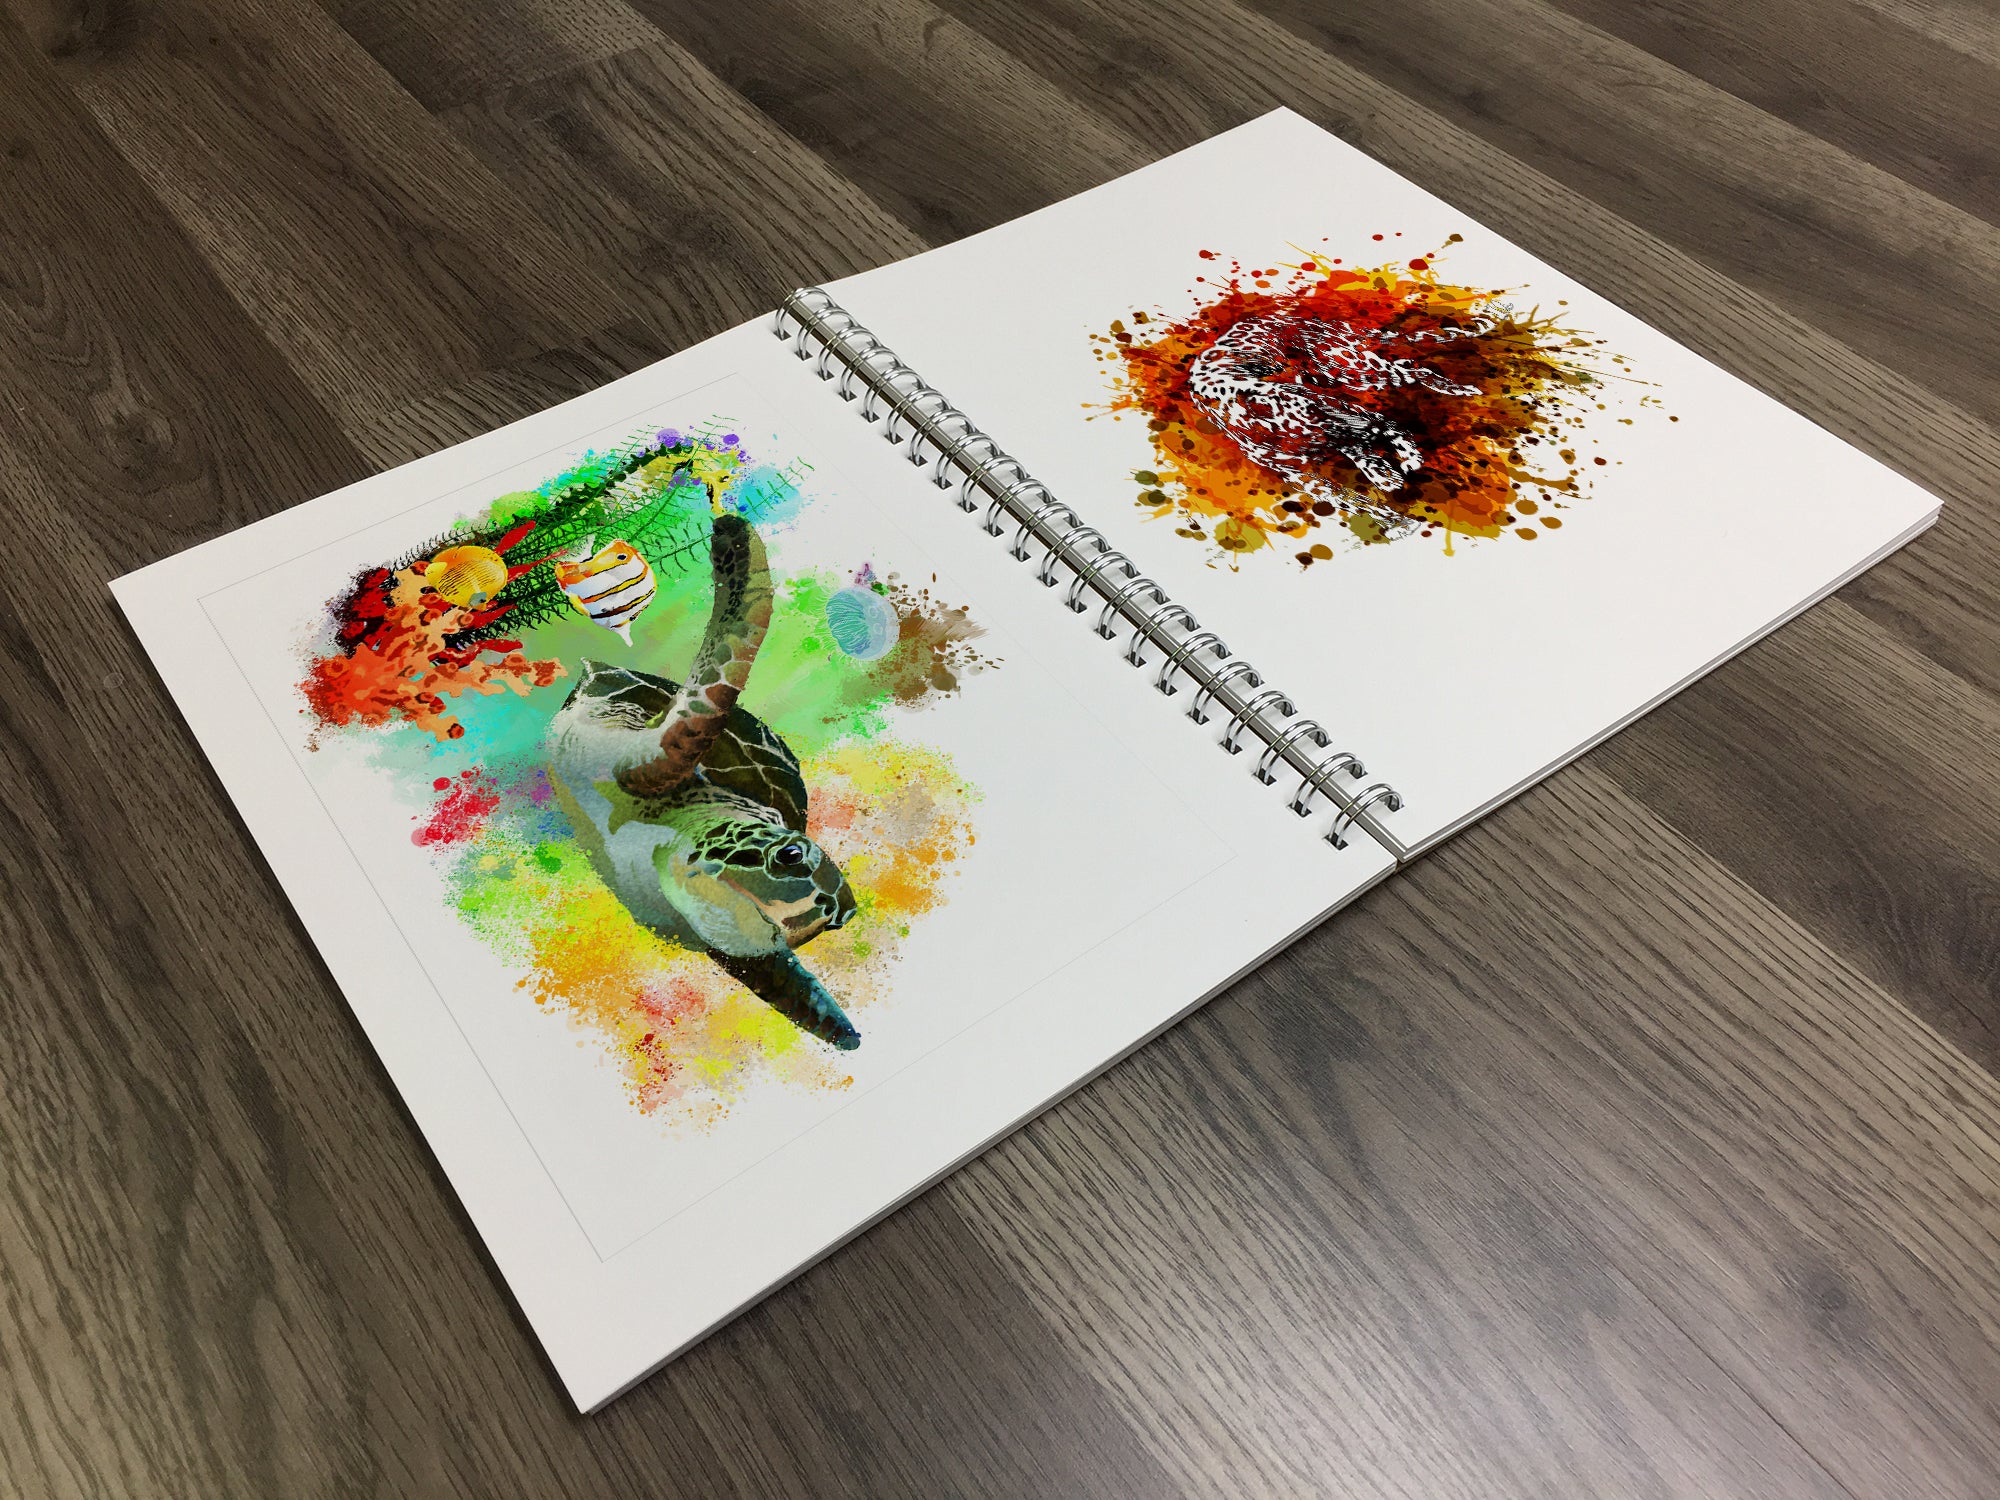 Design Ideation Watercolor Sketch Book. Spiral Bound, Watercolor Paper Sketchbook for Pencil, Ink, Marker, Charcoal and Watercolor Paints. Great for